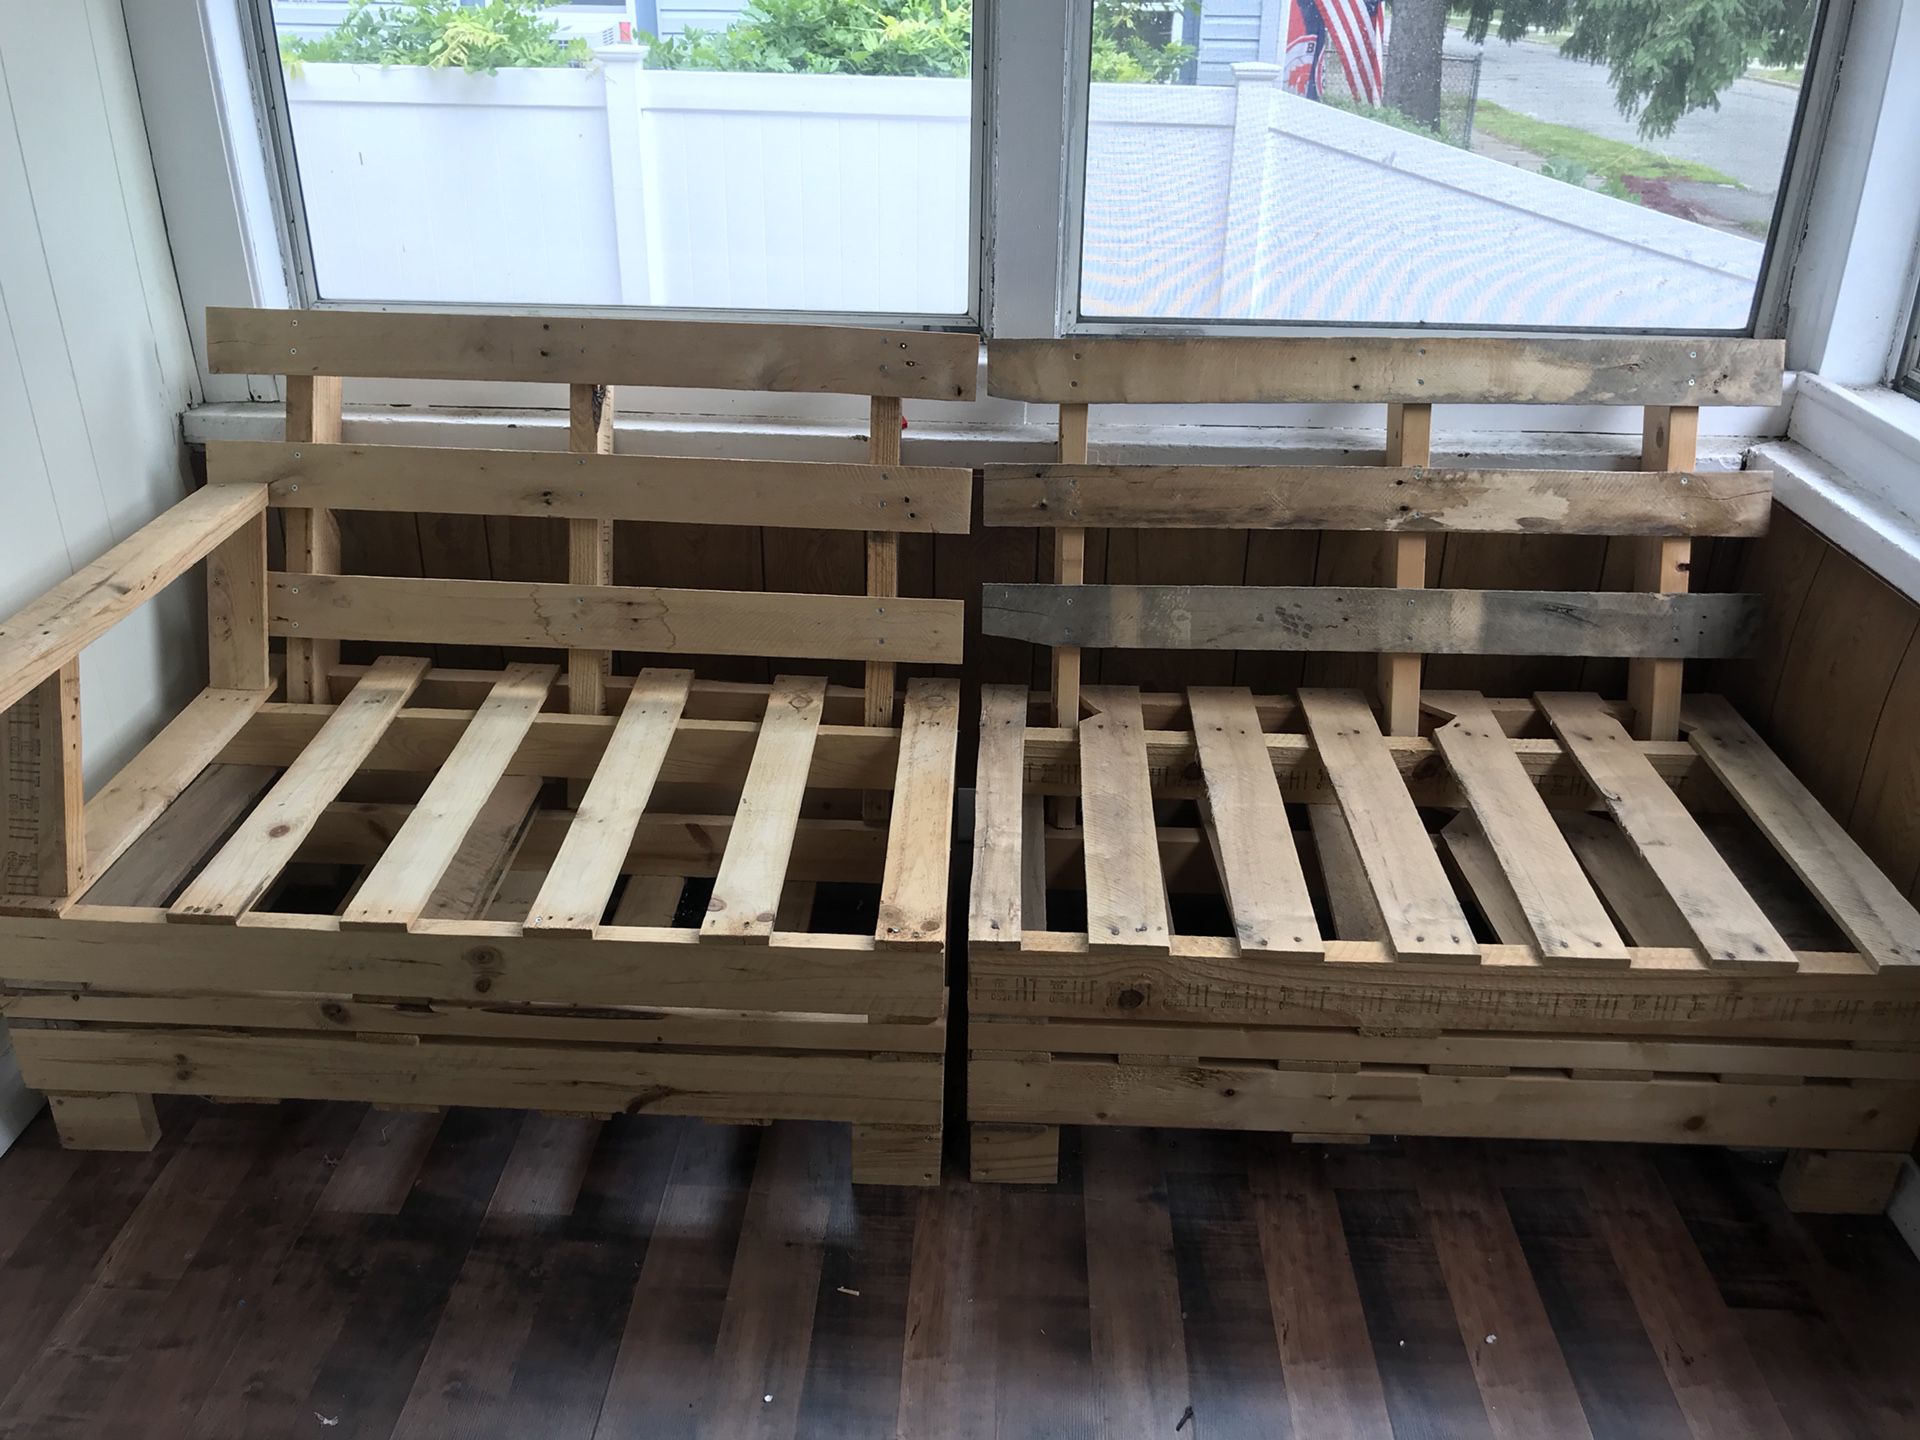 Modern couch made out of pallets